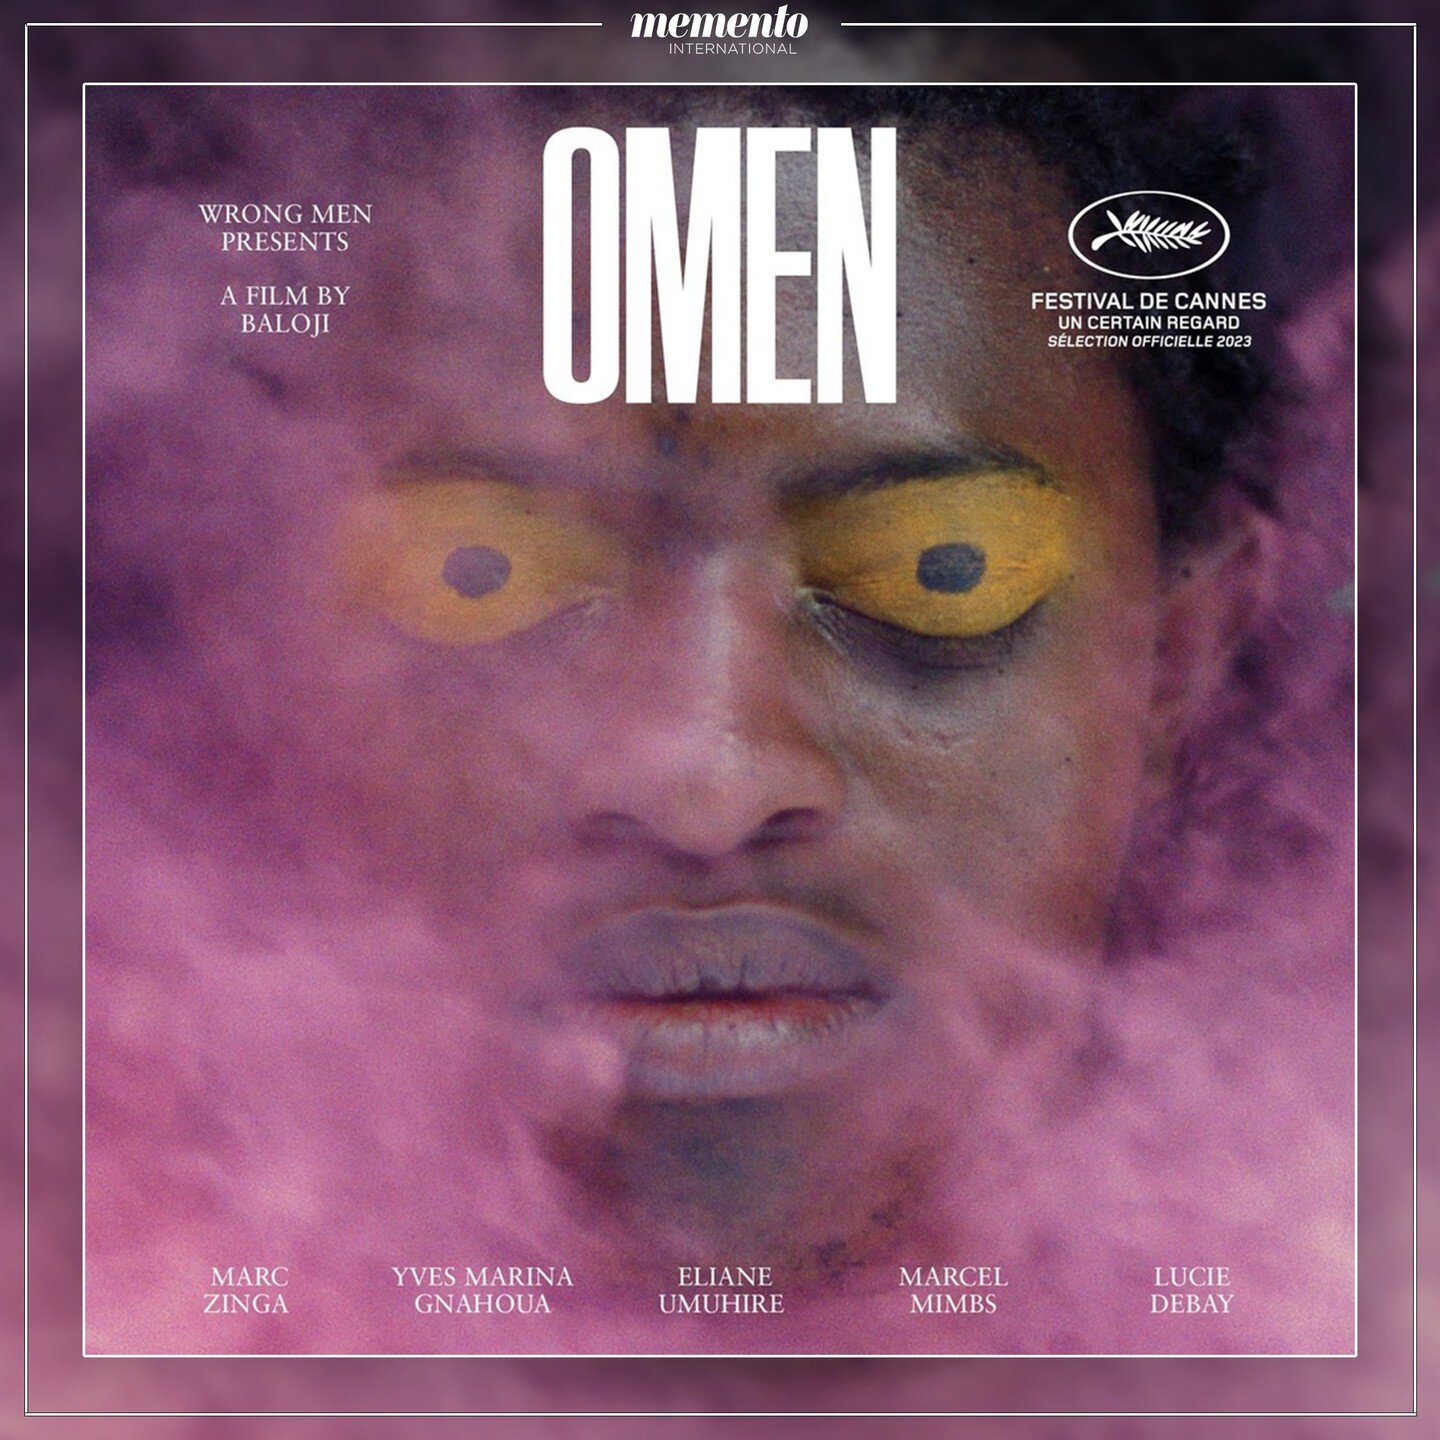 Breaking news! We have just boarded Cannes Un Certain Regard-bound OMEN by Baloji! 🔥

And this comes with a first gorgeous visual of the film, more to come...

@baloji @festivaldecannes @wrongmen #festivaldecannes #uncertainregard #firstfilm #omen #